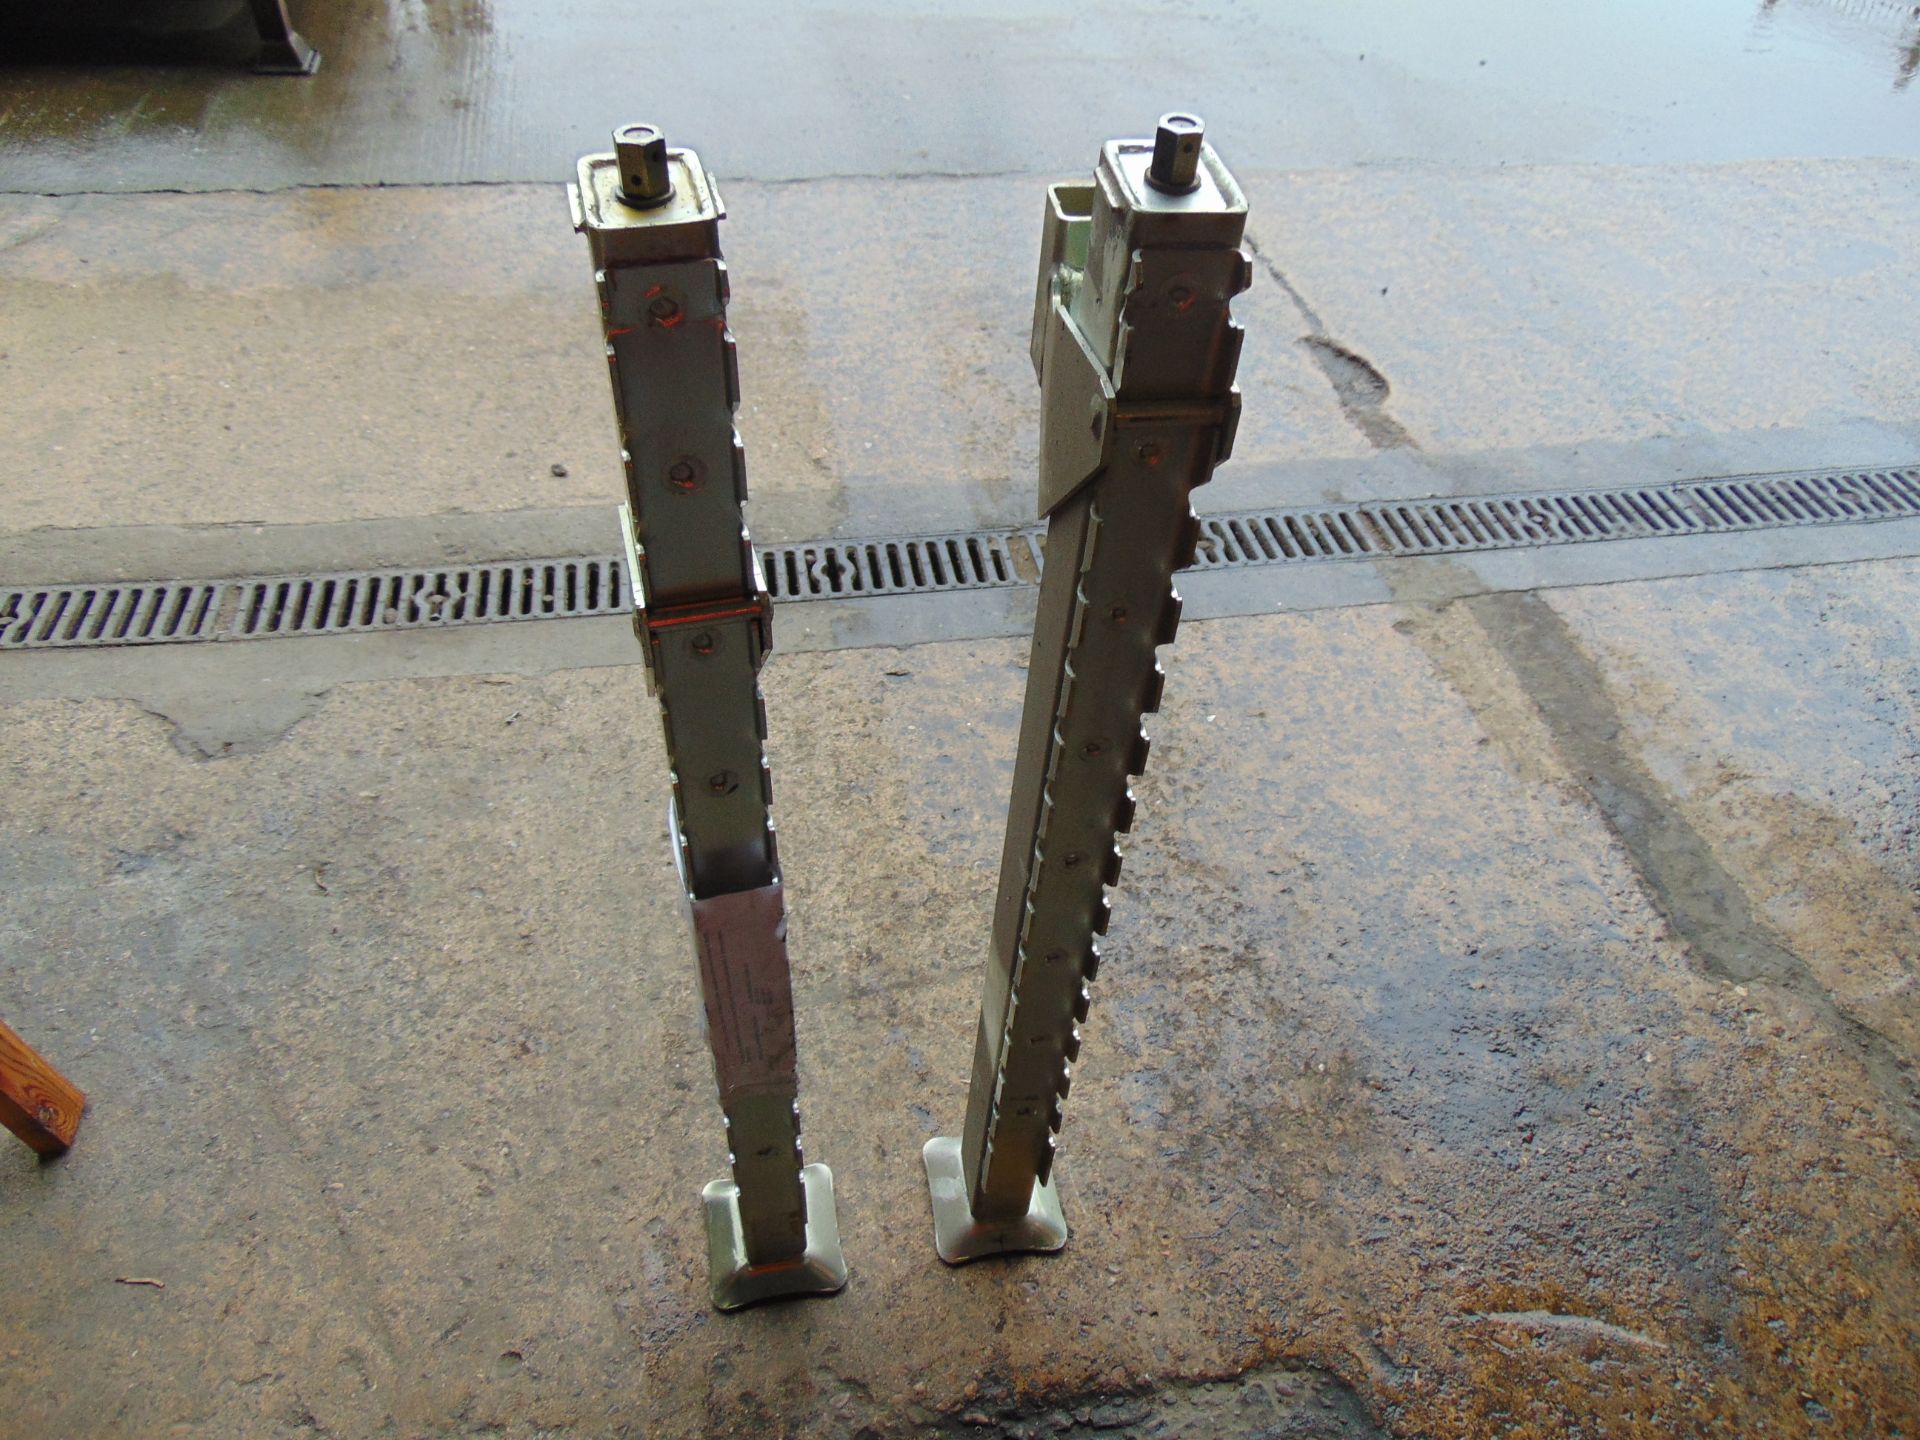 2 x New Unissued 2400kgs High Lift Screw Jacks for 4x4's etc 90cms as shown - Image 4 of 7